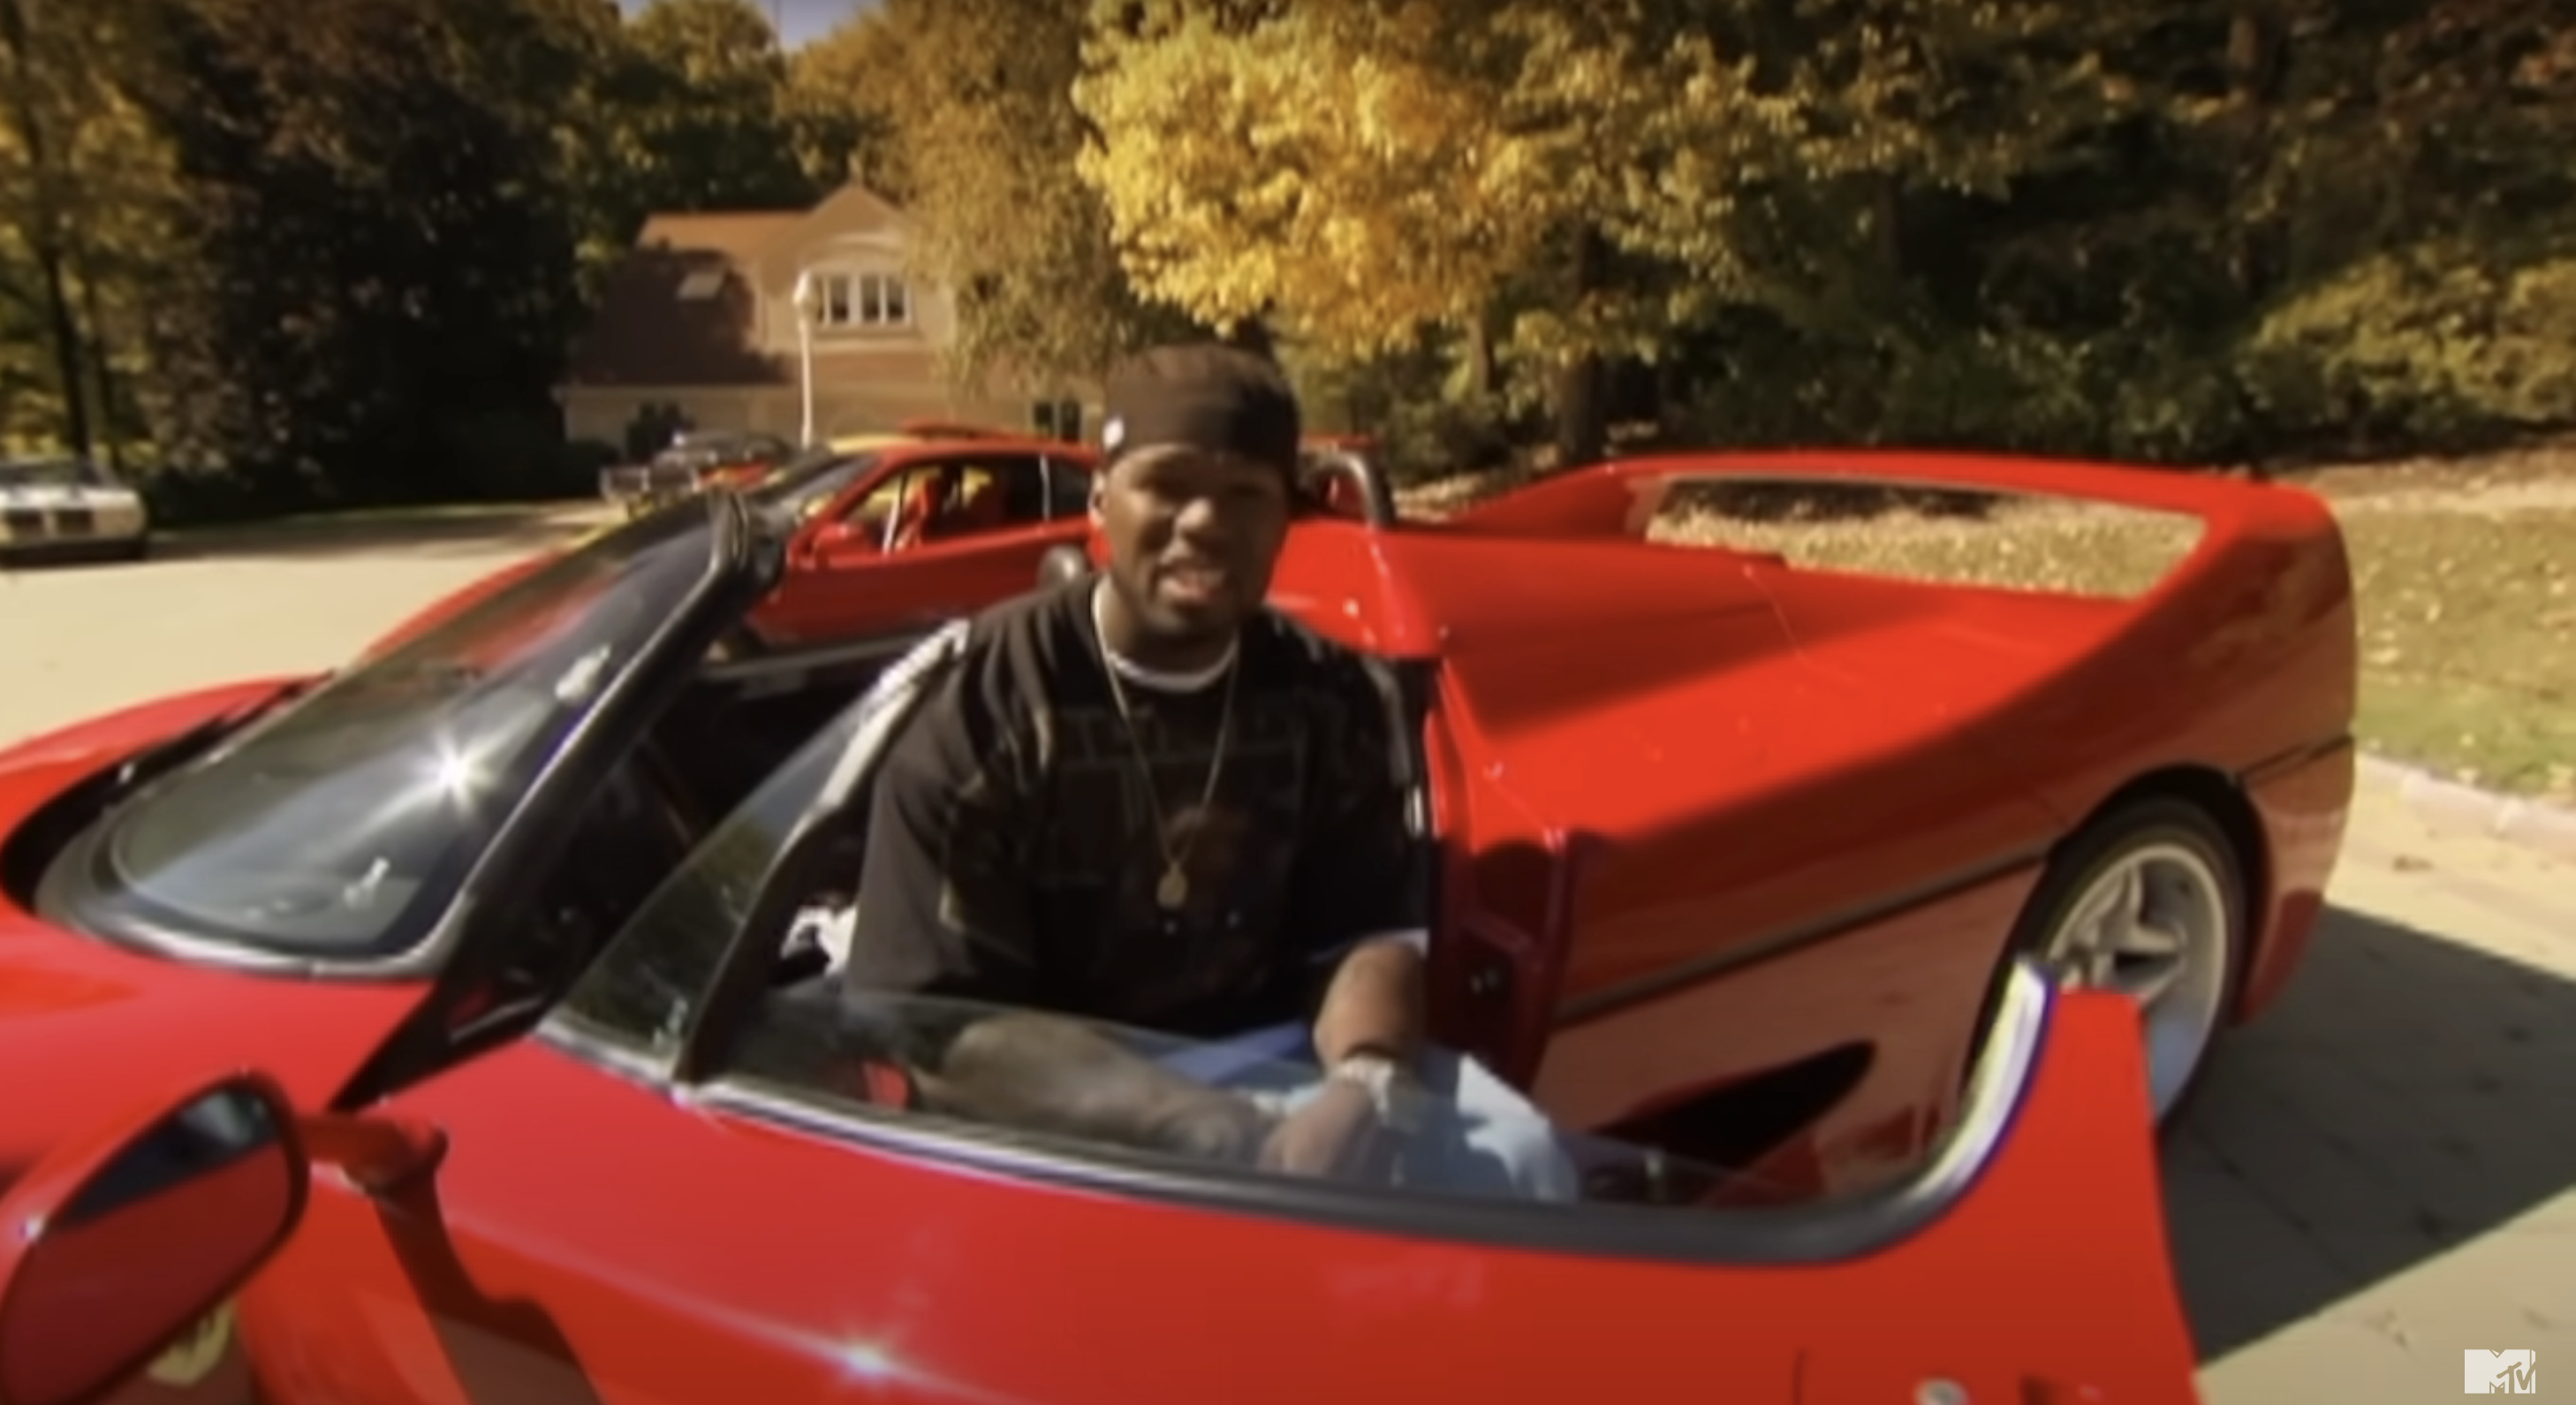 50 Cent sitting in a sports car, smiling, with another similar car next to him